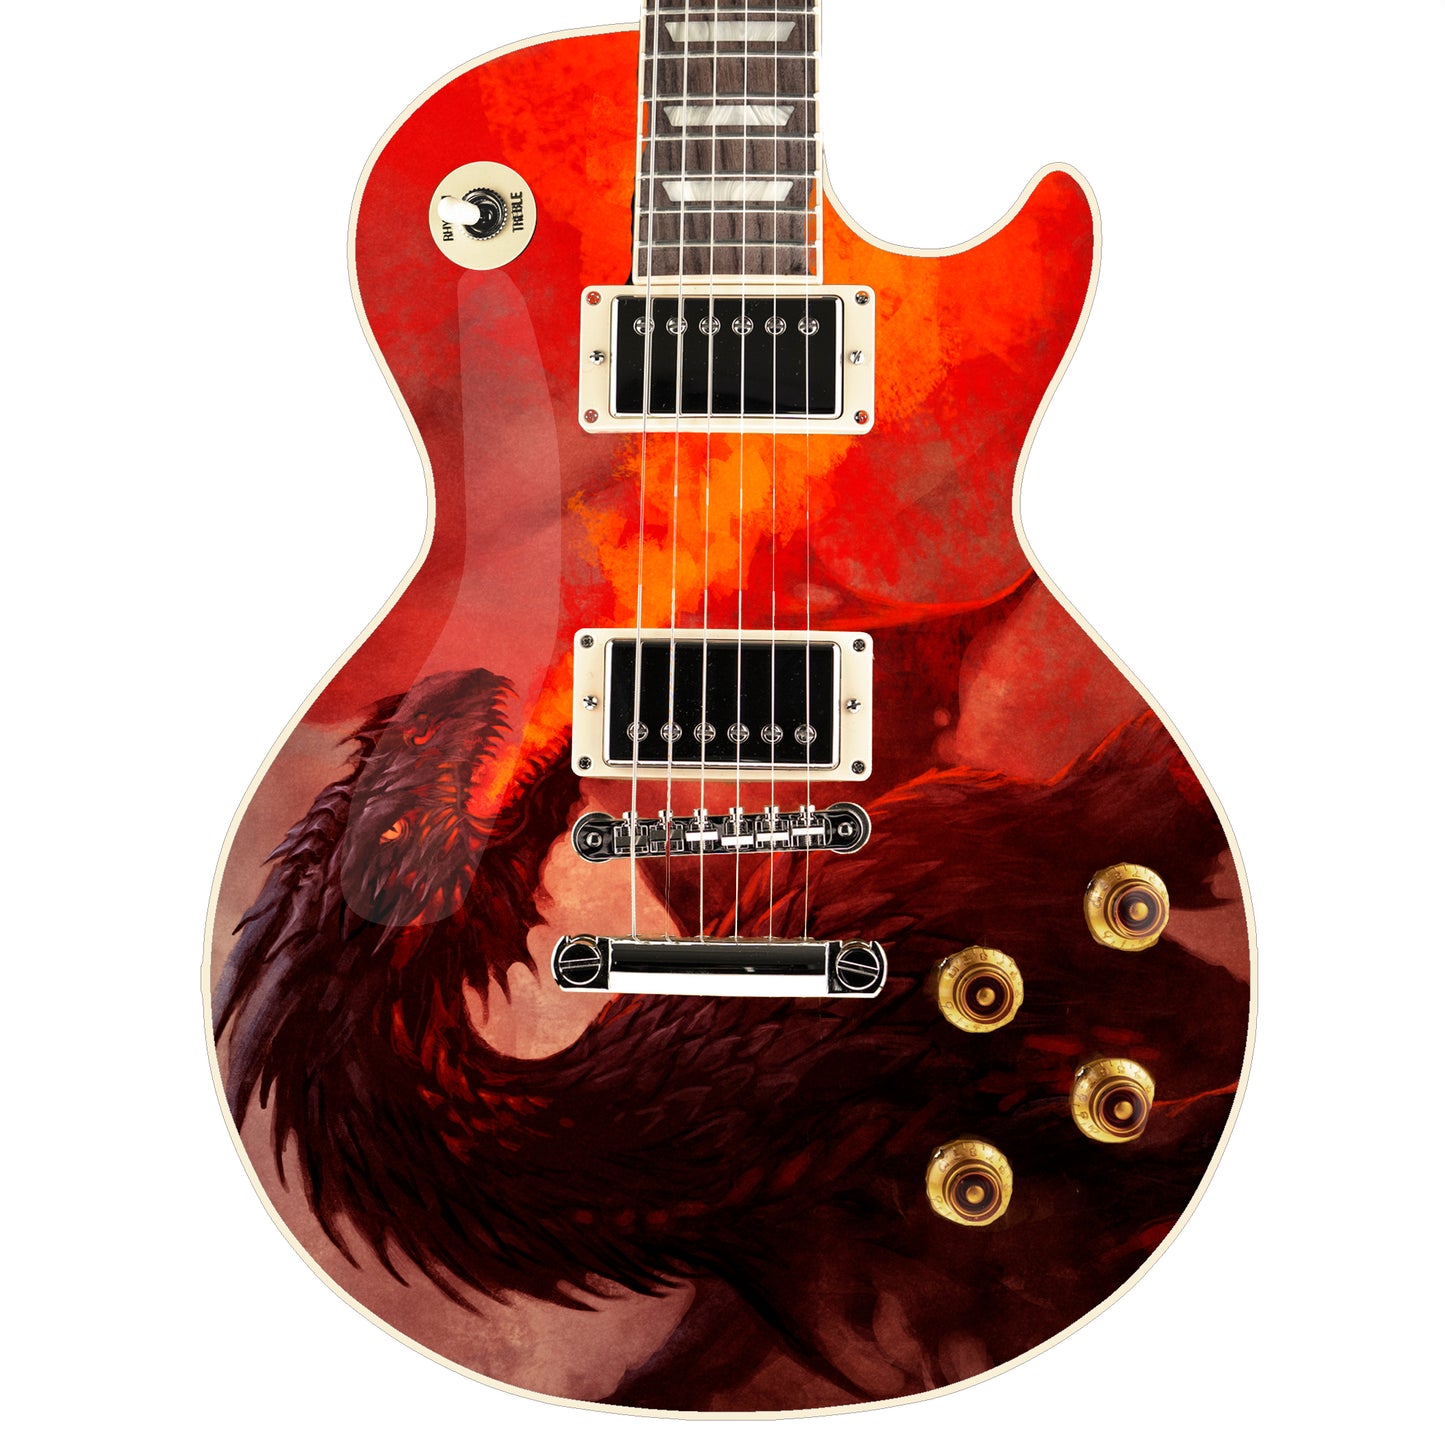 The Warrior Dragons Skin Wrap Vinyl Decal Stickers for Guitars & Bass. Fire Breather GS181